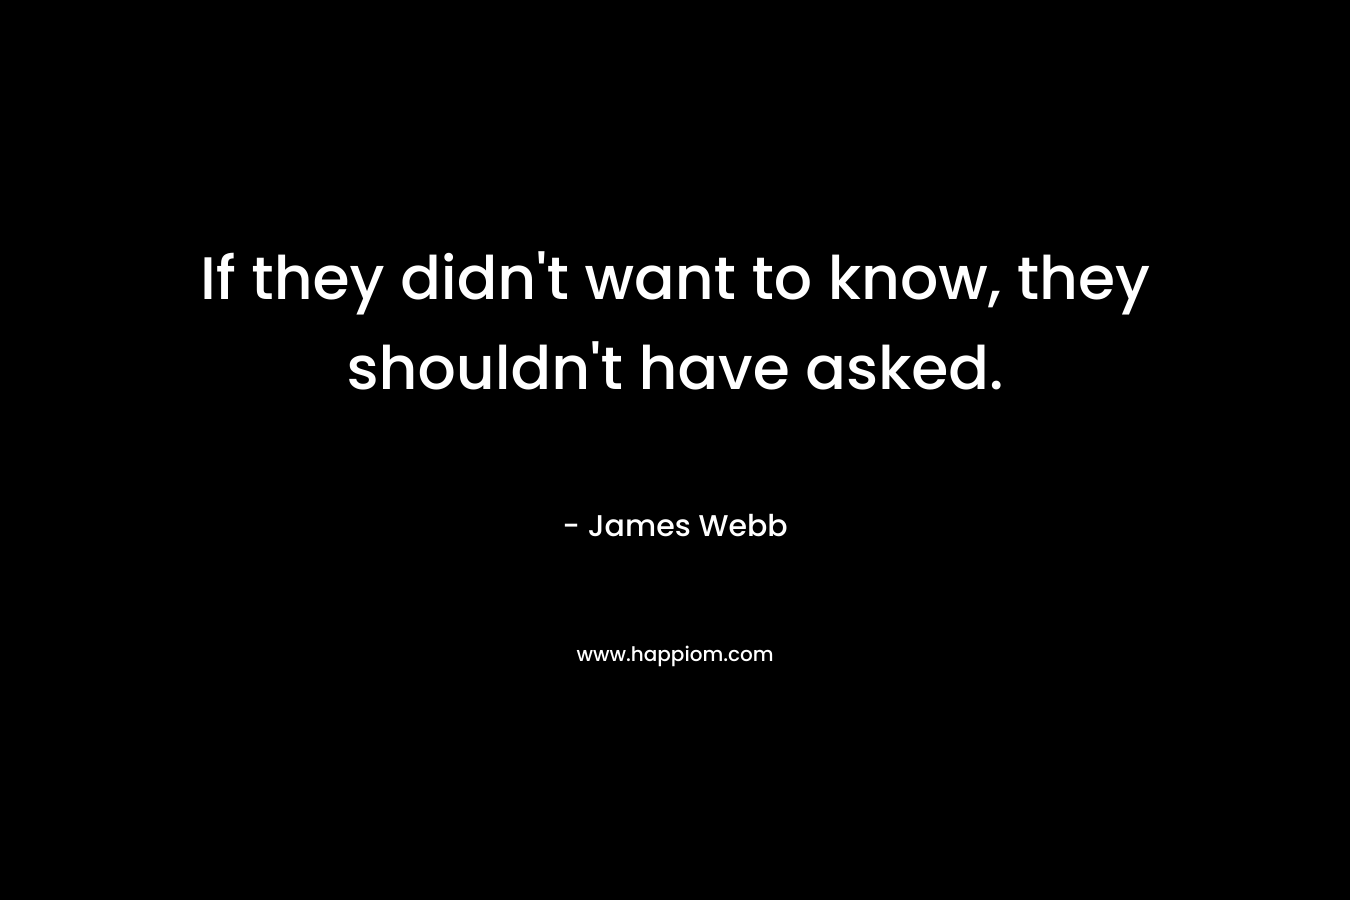 If they didn’t want to know, they shouldn’t have asked. – James Webb